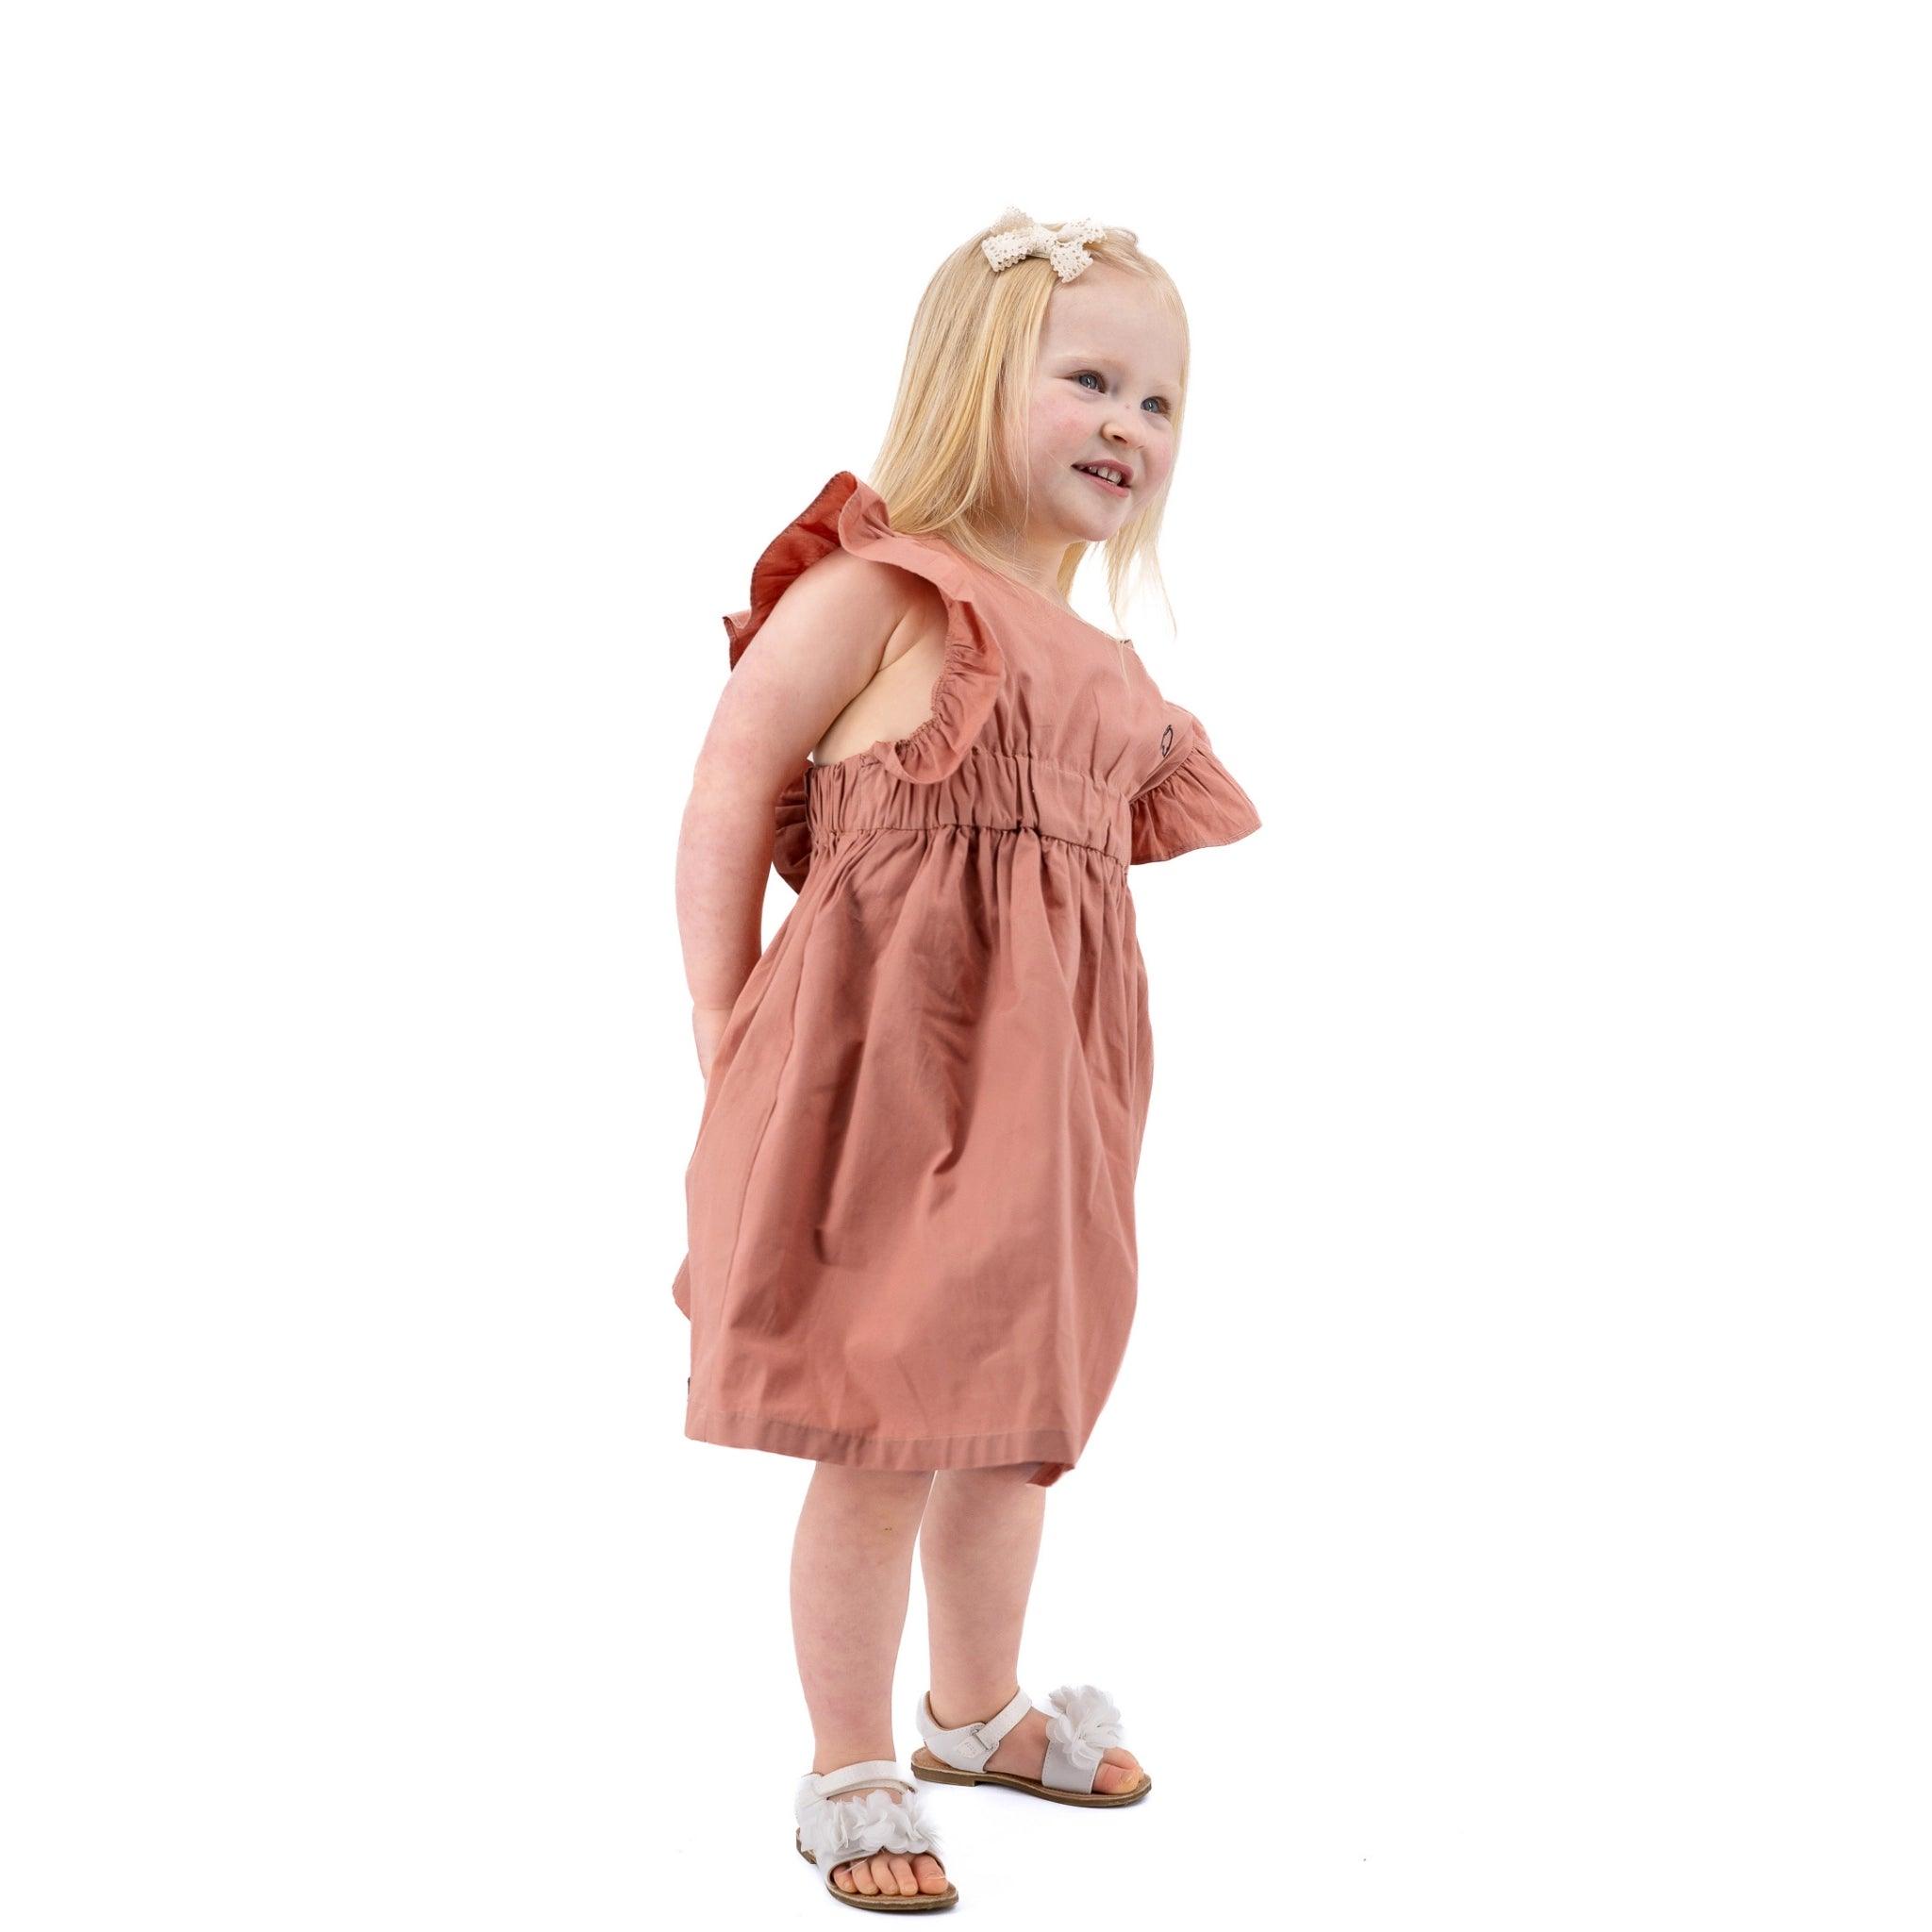 A young girl with blonde hair, wearing a ruffled Karee brick dust cotton floral dress and white sandals, smiling and looking over her shoulder against a white background.